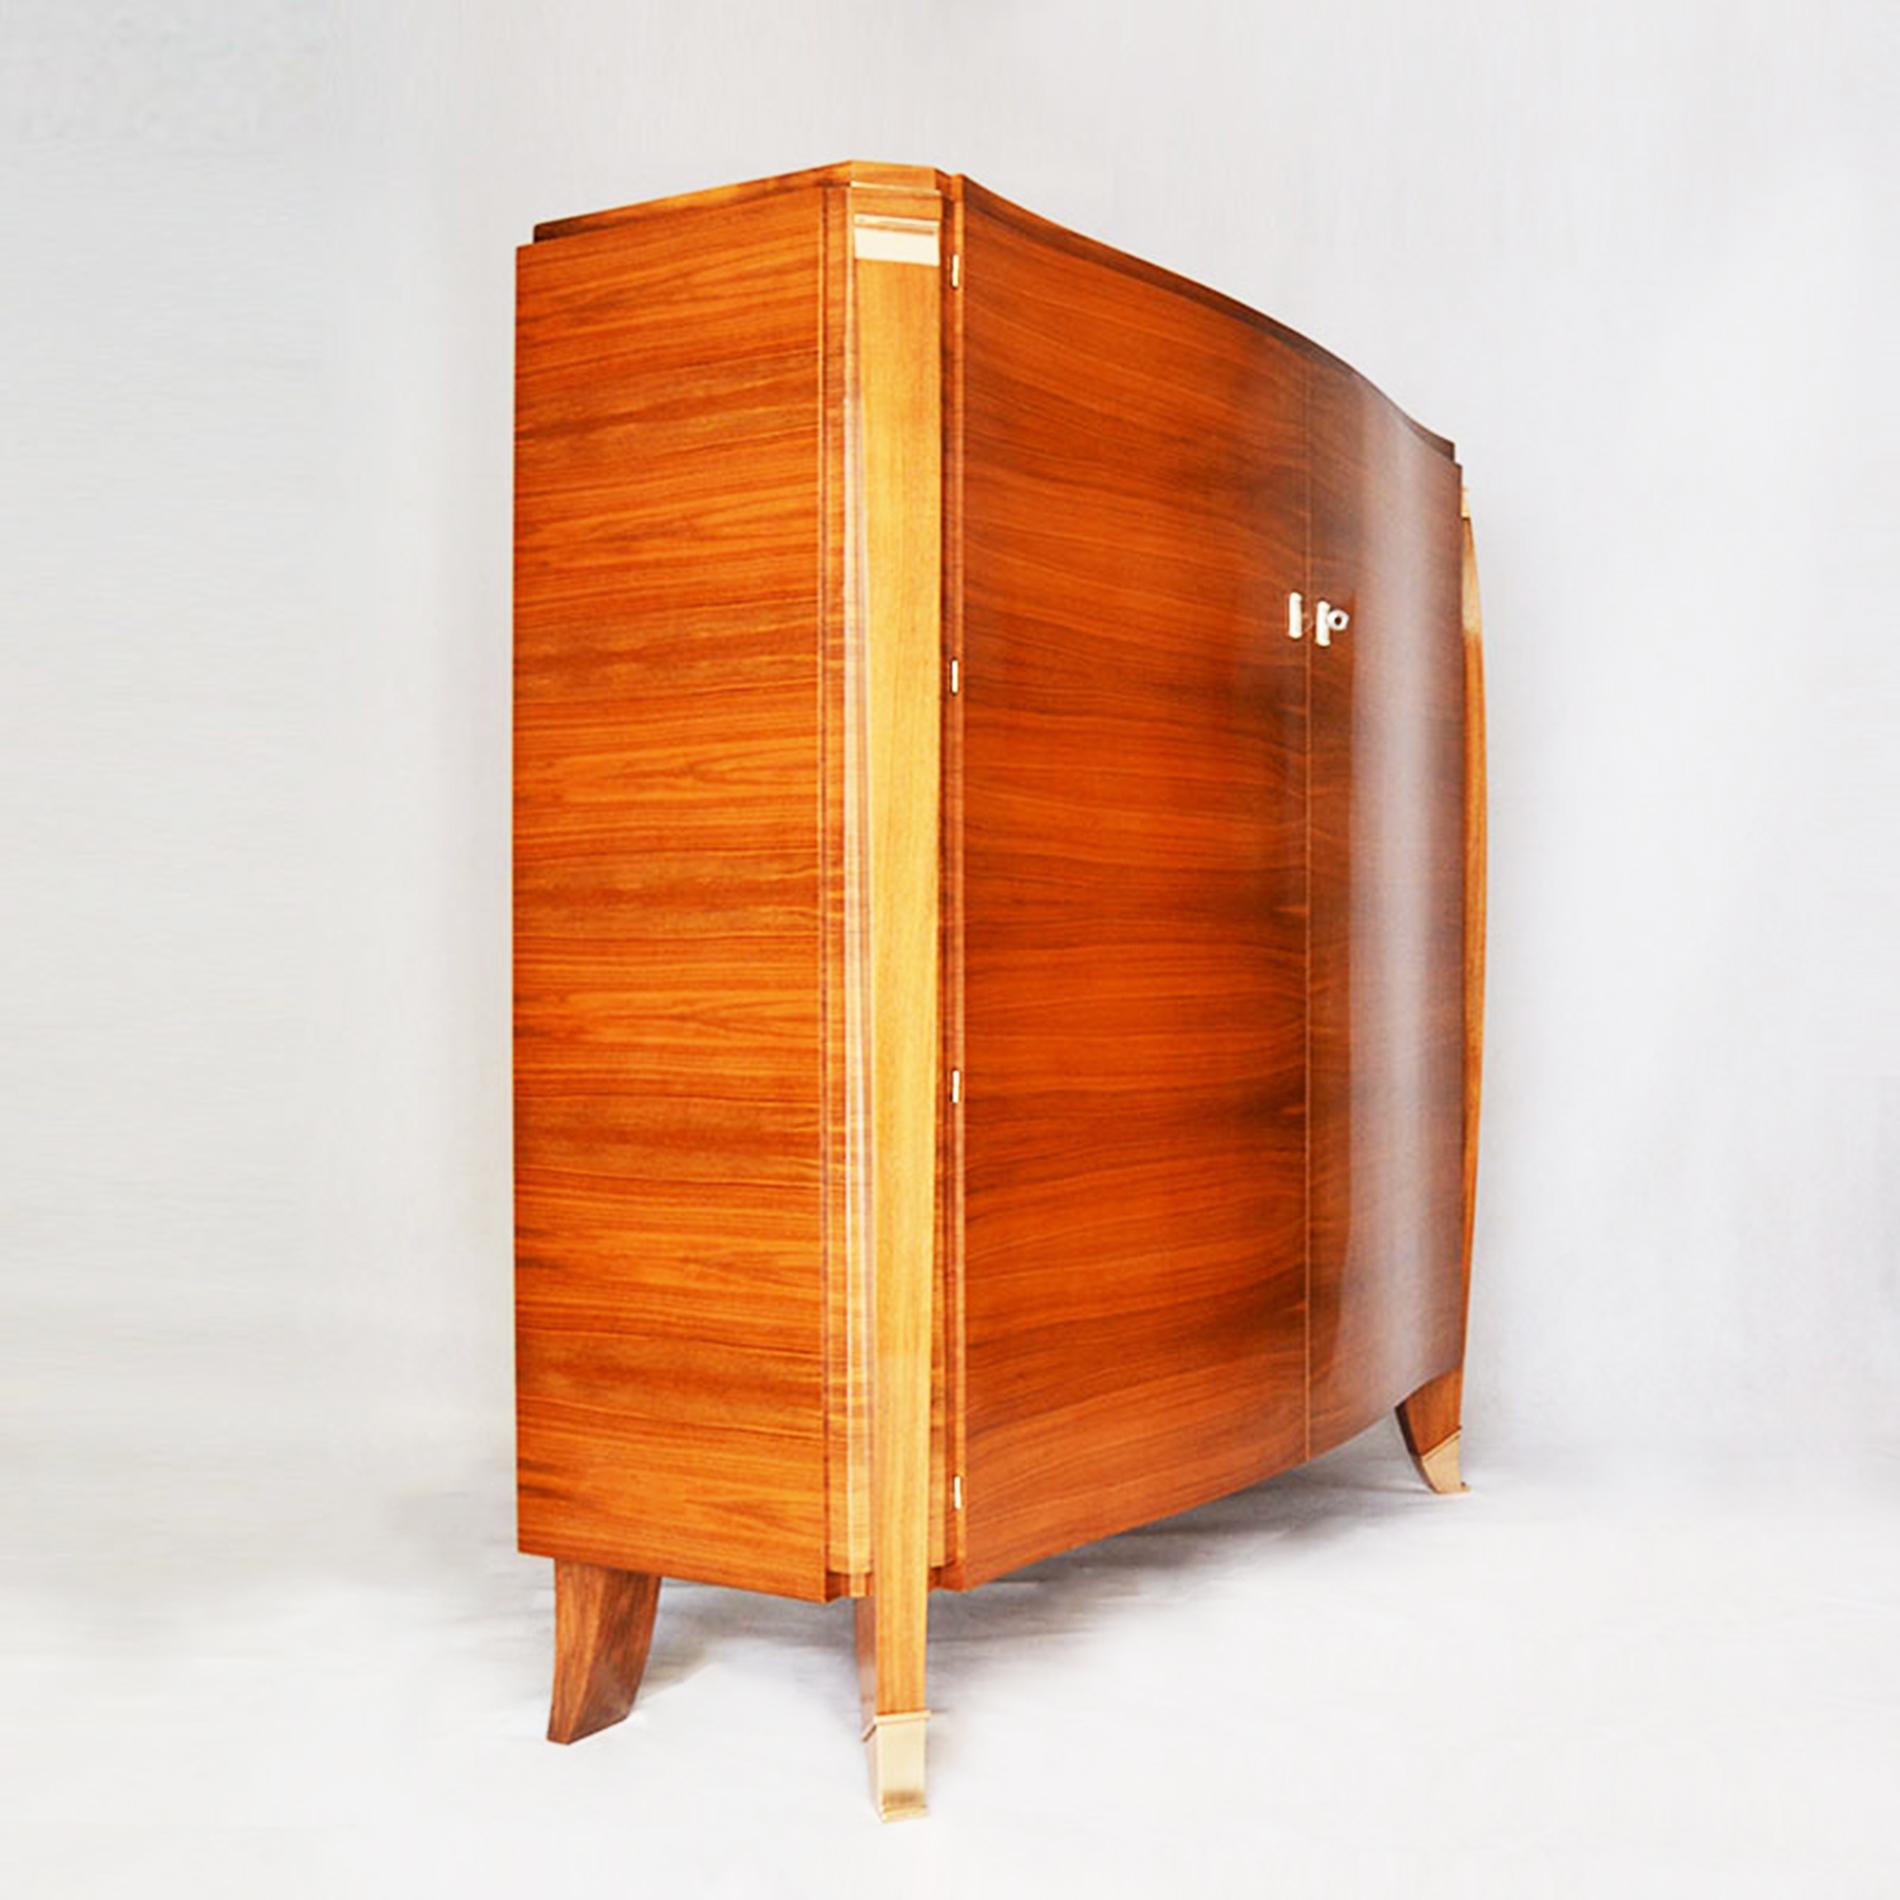 French Art Deco Walnut Cabinet with Bronze Applications by Maurice Rinck, 1930s, France For Sale